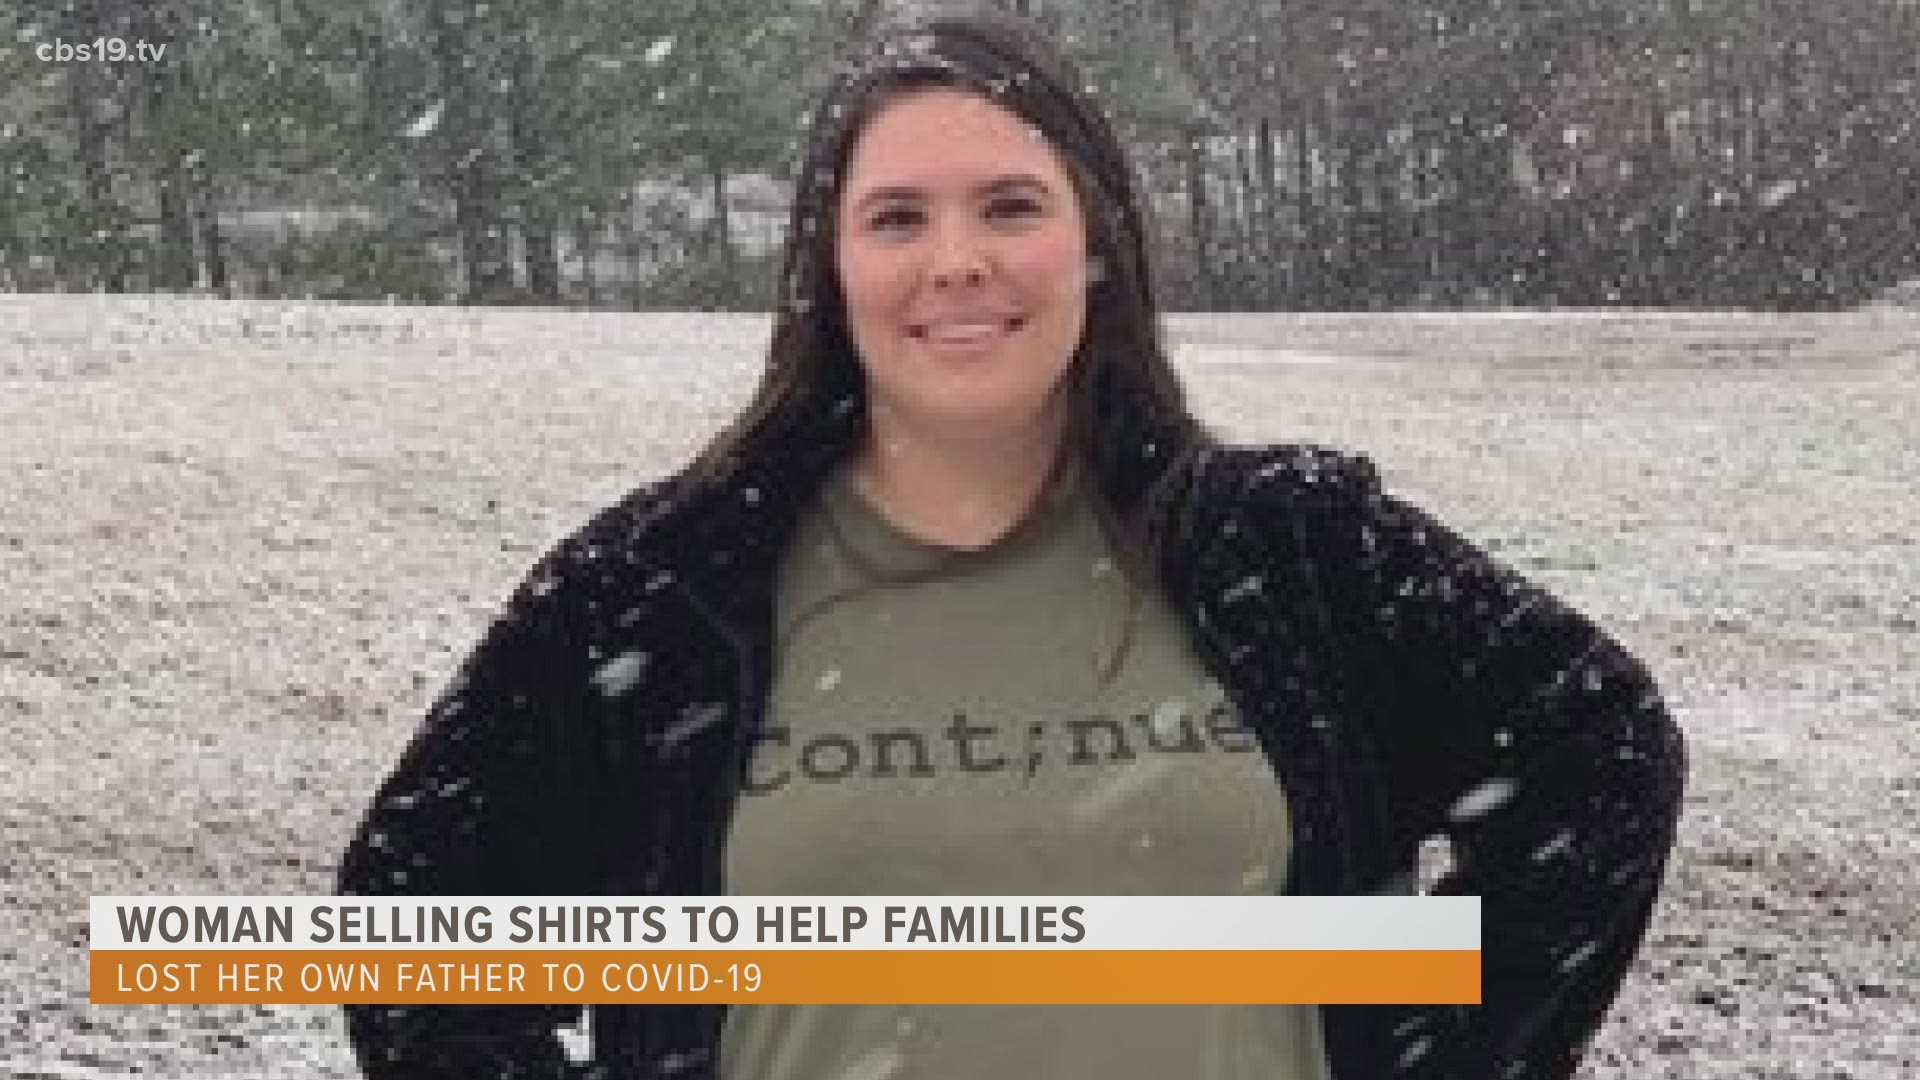 After losing her father to COVID-19 Jordan Sims and her family were devastated. The community came together to help them financially. Now, she wants pay it forward.